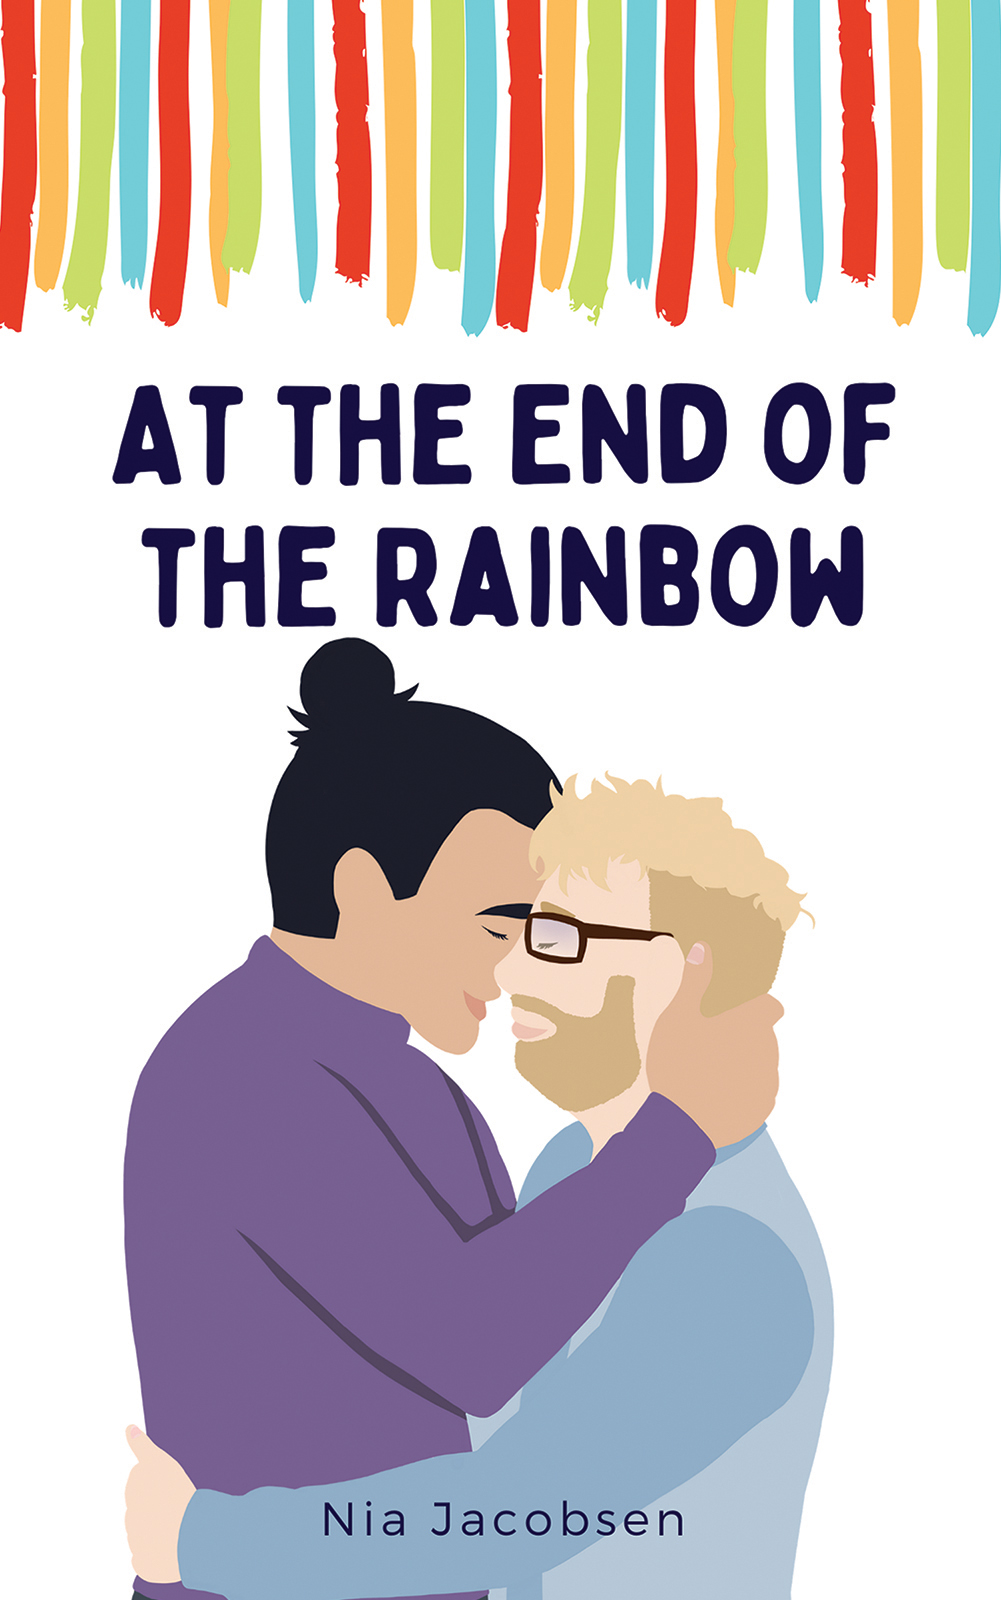 This image is the cover for the book At the End of the Rainbow